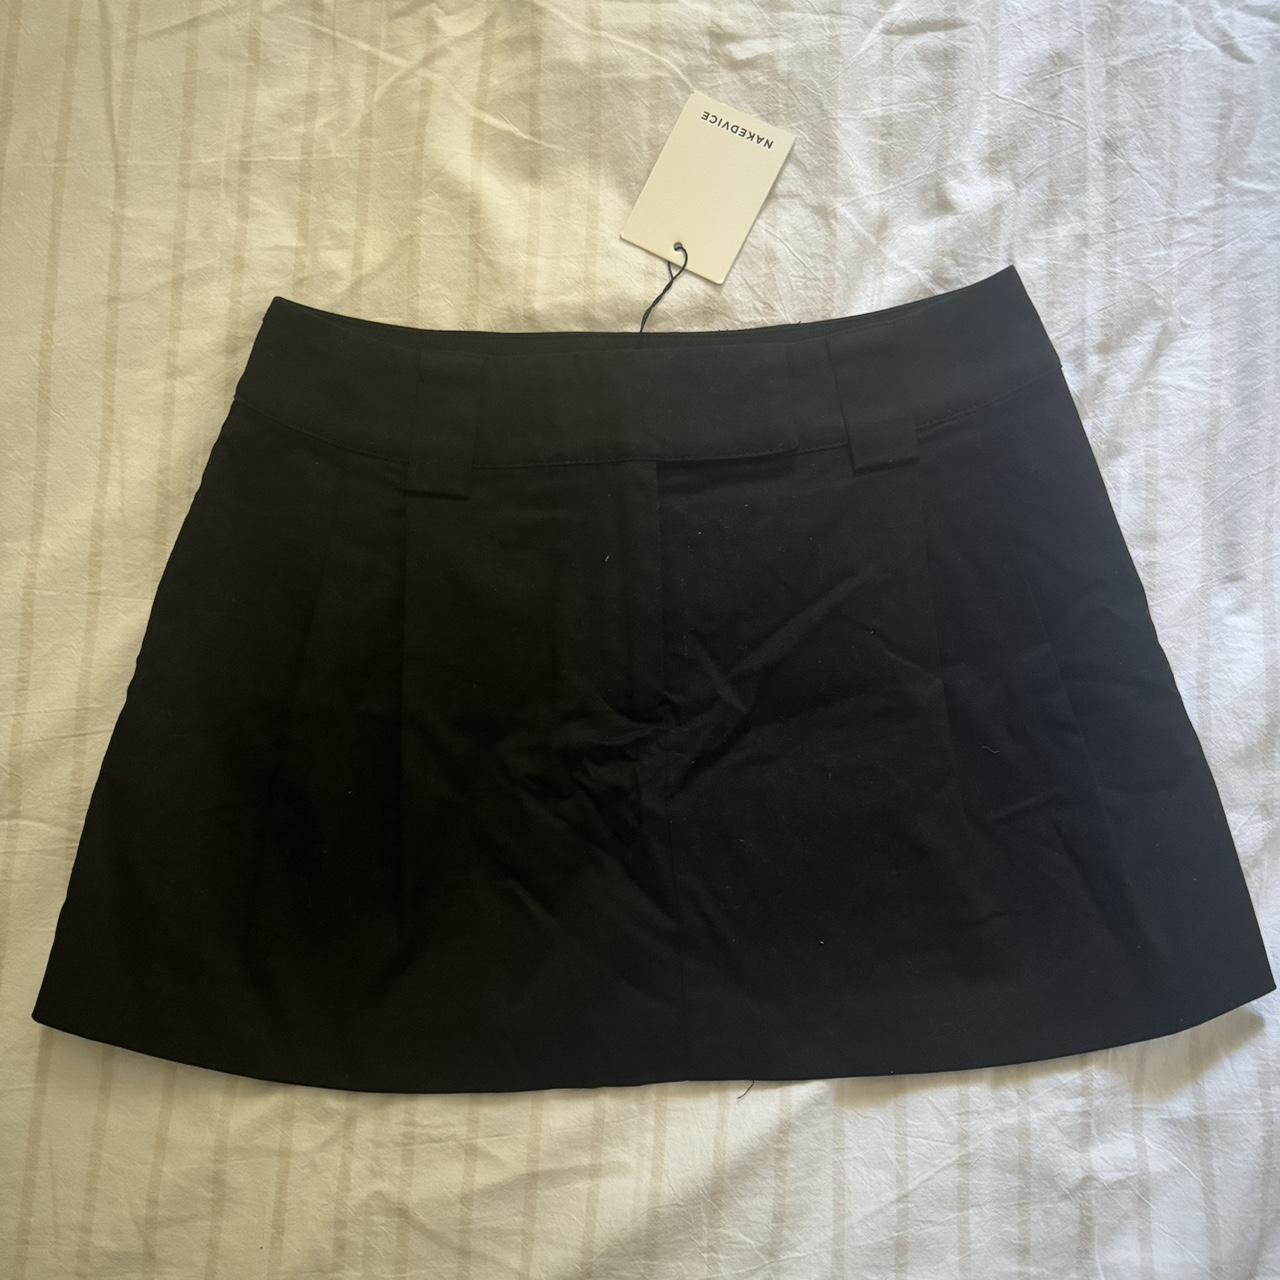 Naked vice wren mini skirt New with tags RRP $109 - Depop